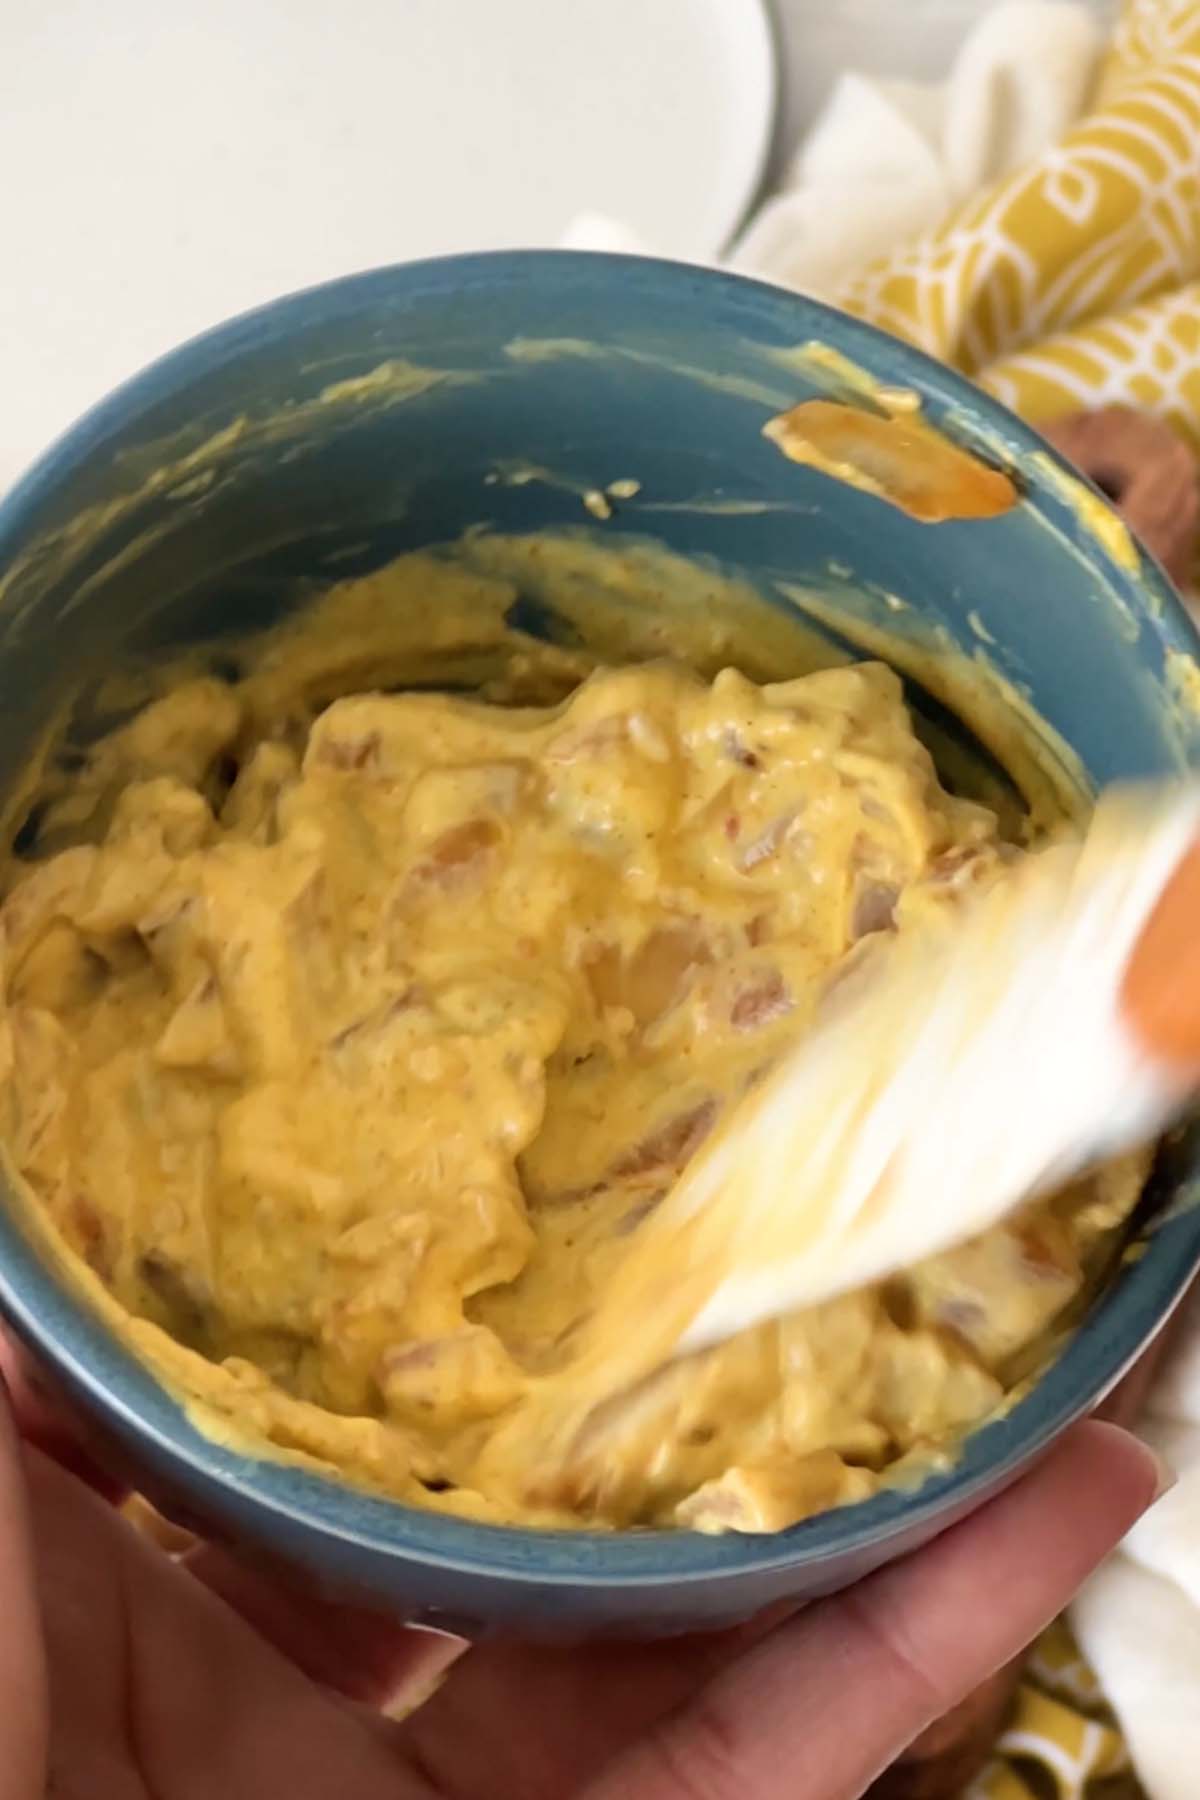 A chunky yellow sauce is stirred in a blue bowl.